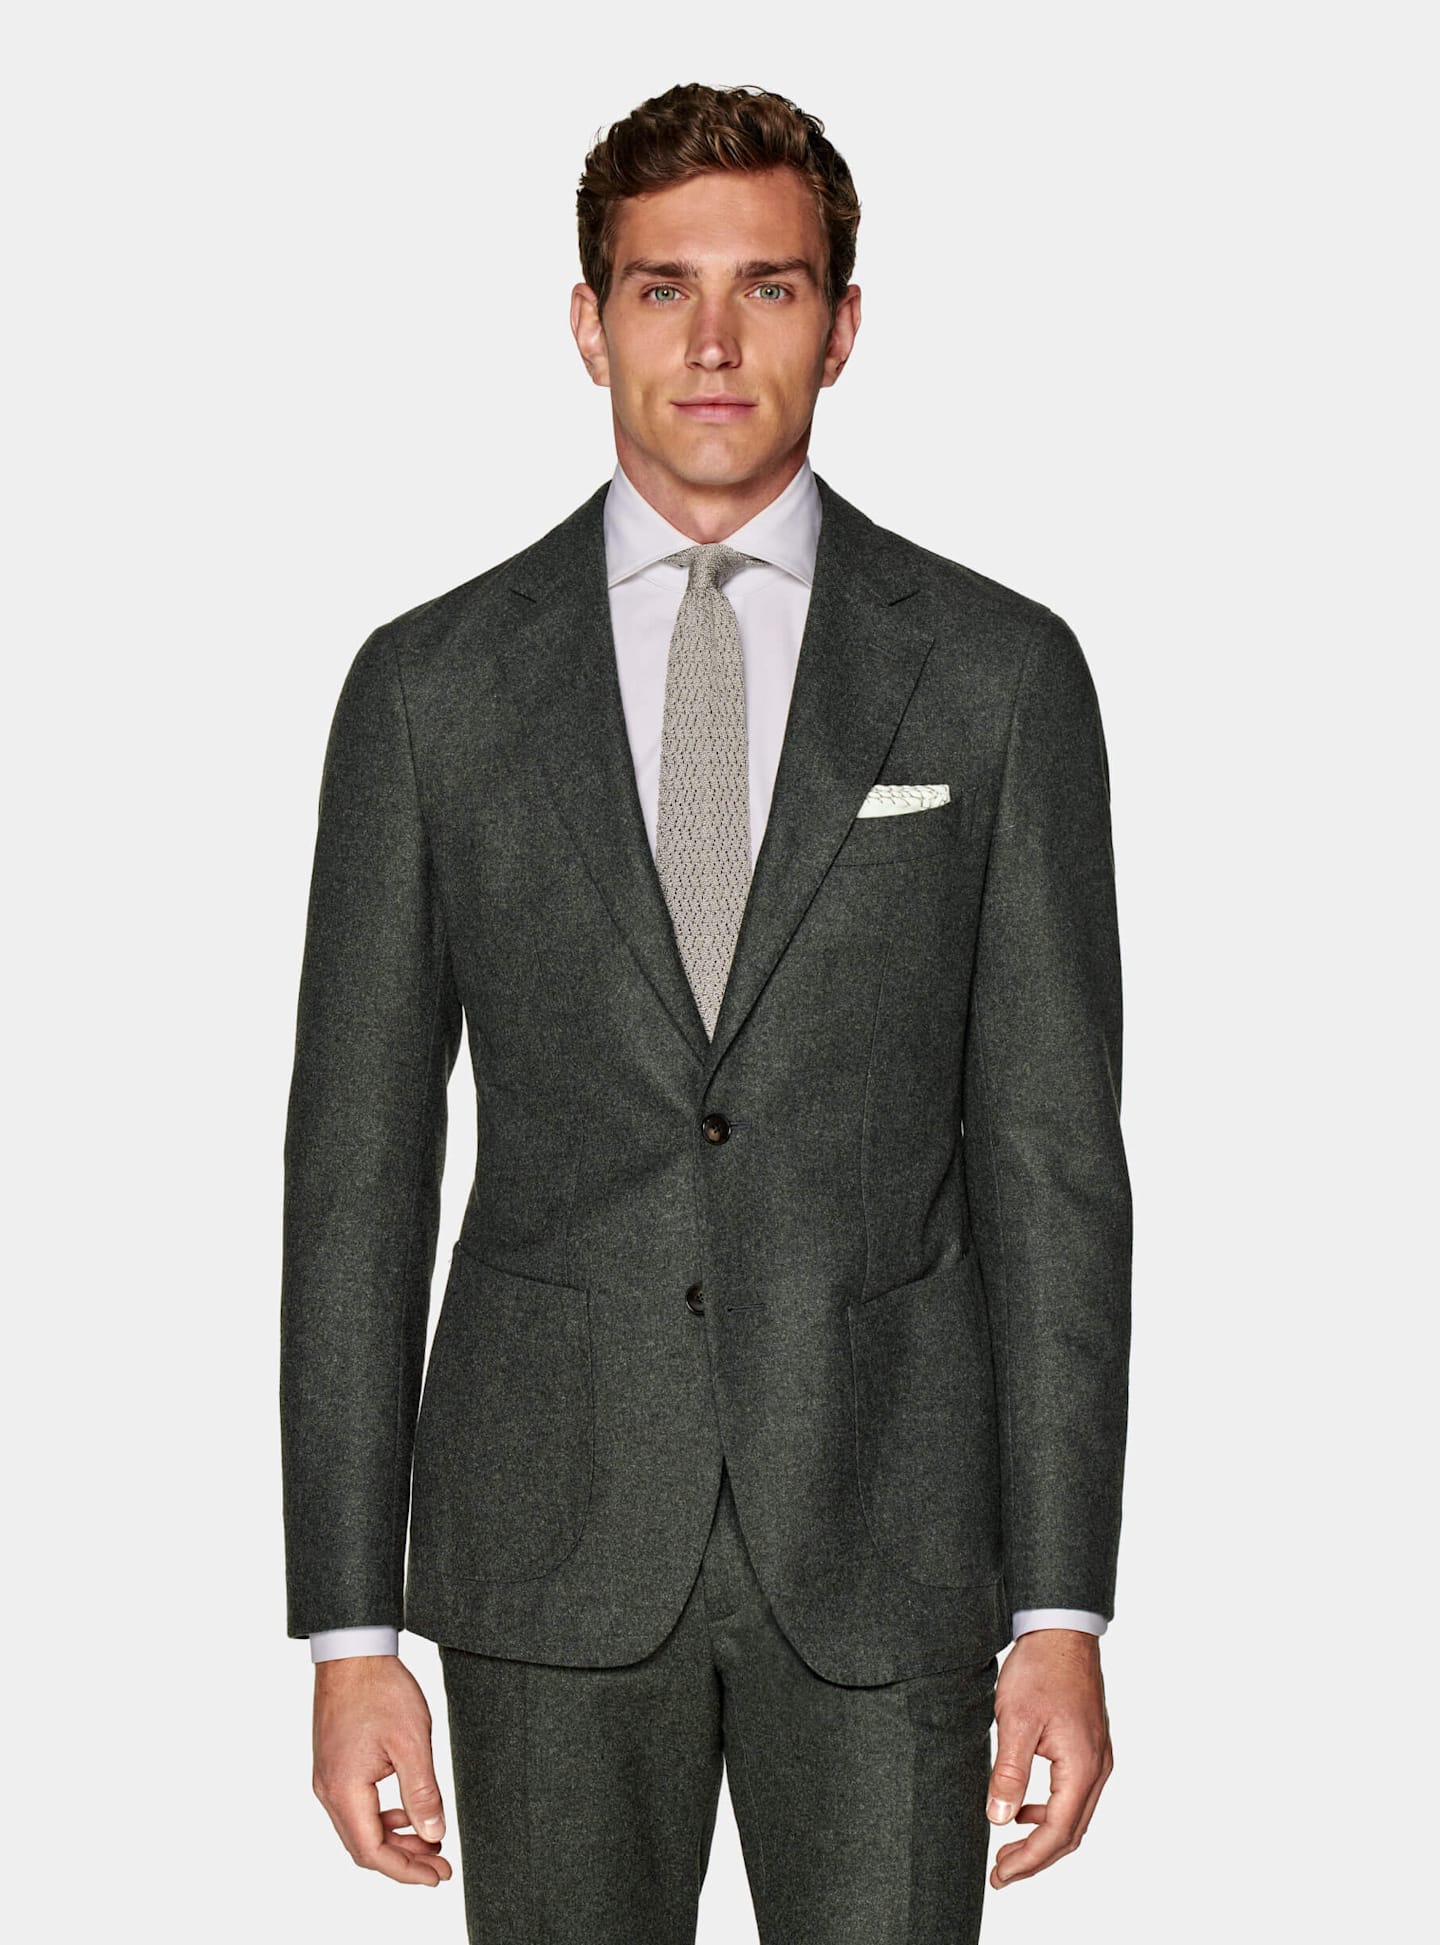 A winter wedding look with a warm single-breasted green circular flannel suit. 